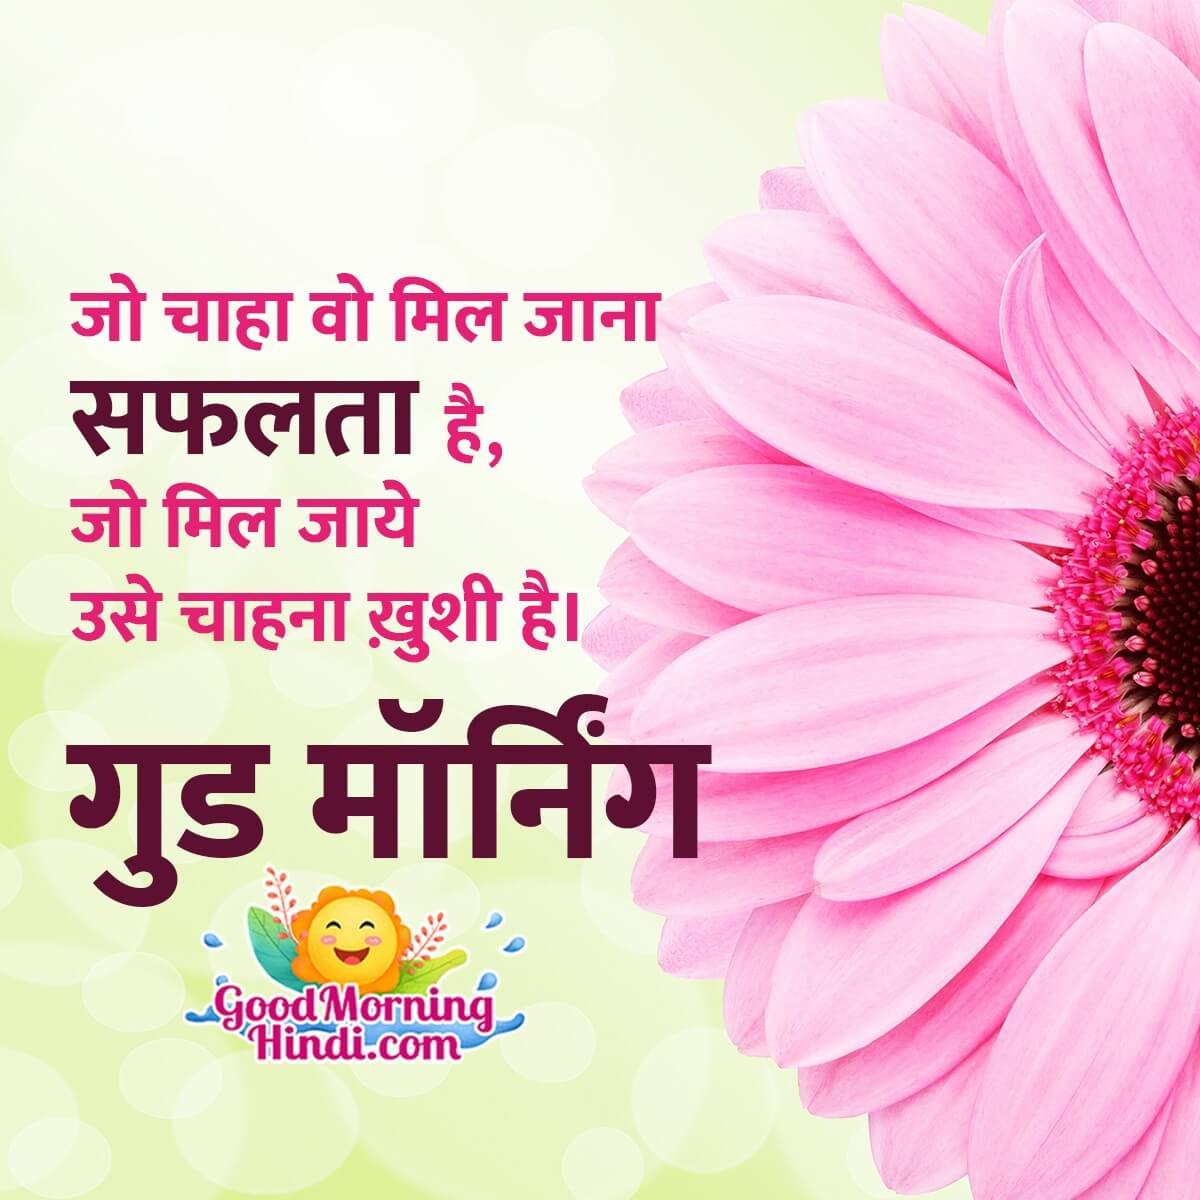 Best Good Morning Quotes In Hindi - Good Morning Wishes & Images ...